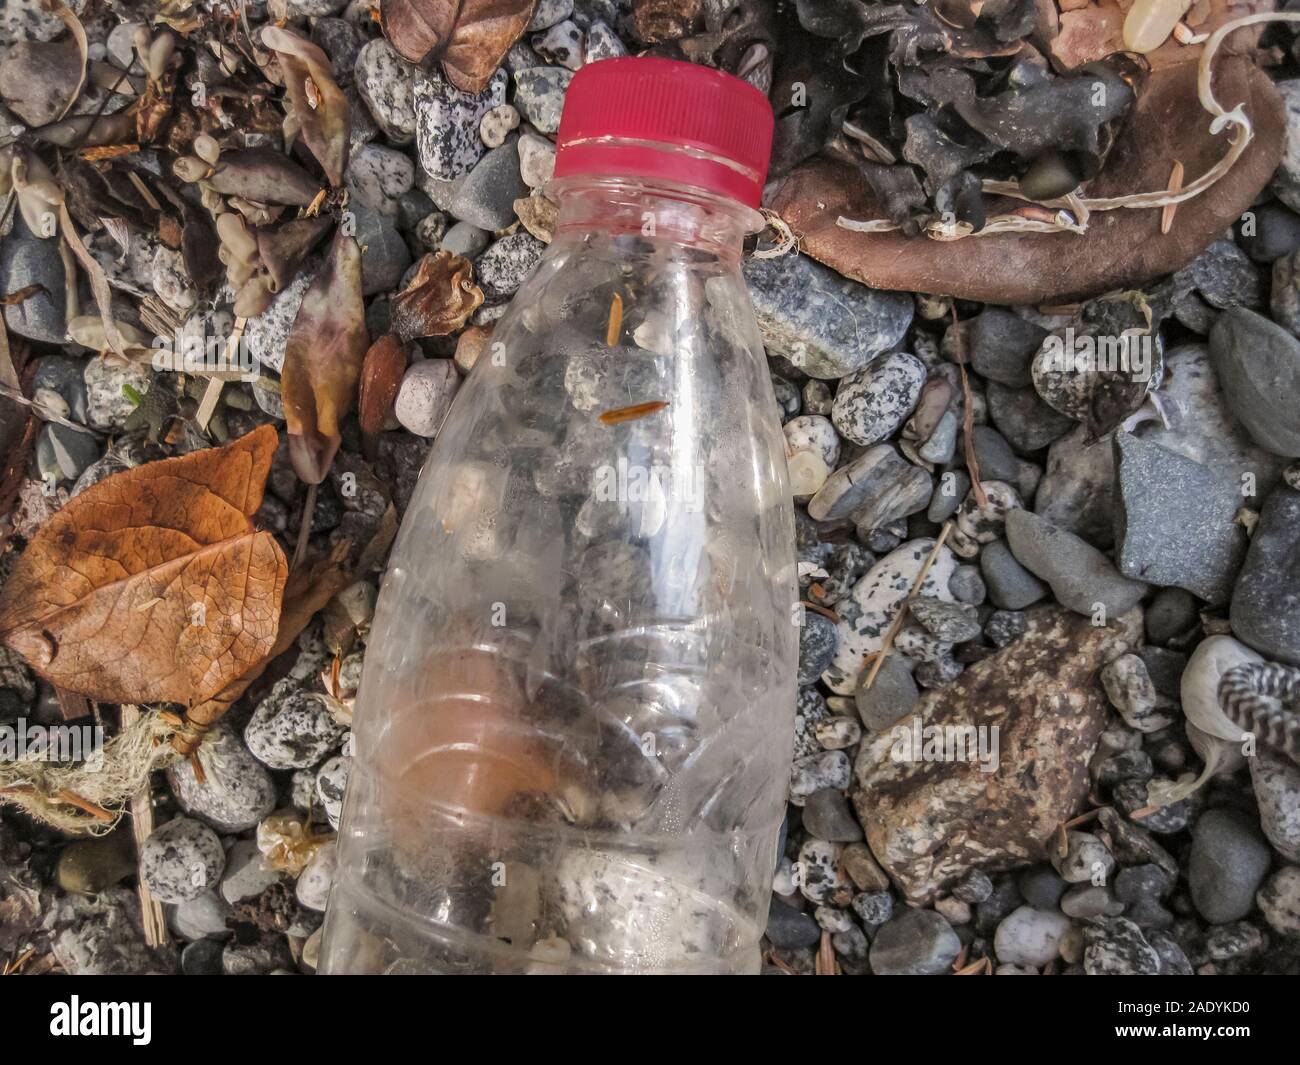 Plastic pollution in the marine environment: a discarded single-use water bottle, on a pebble beach in Queen Charlotte Strait on Canada's west coast. Stock Photo